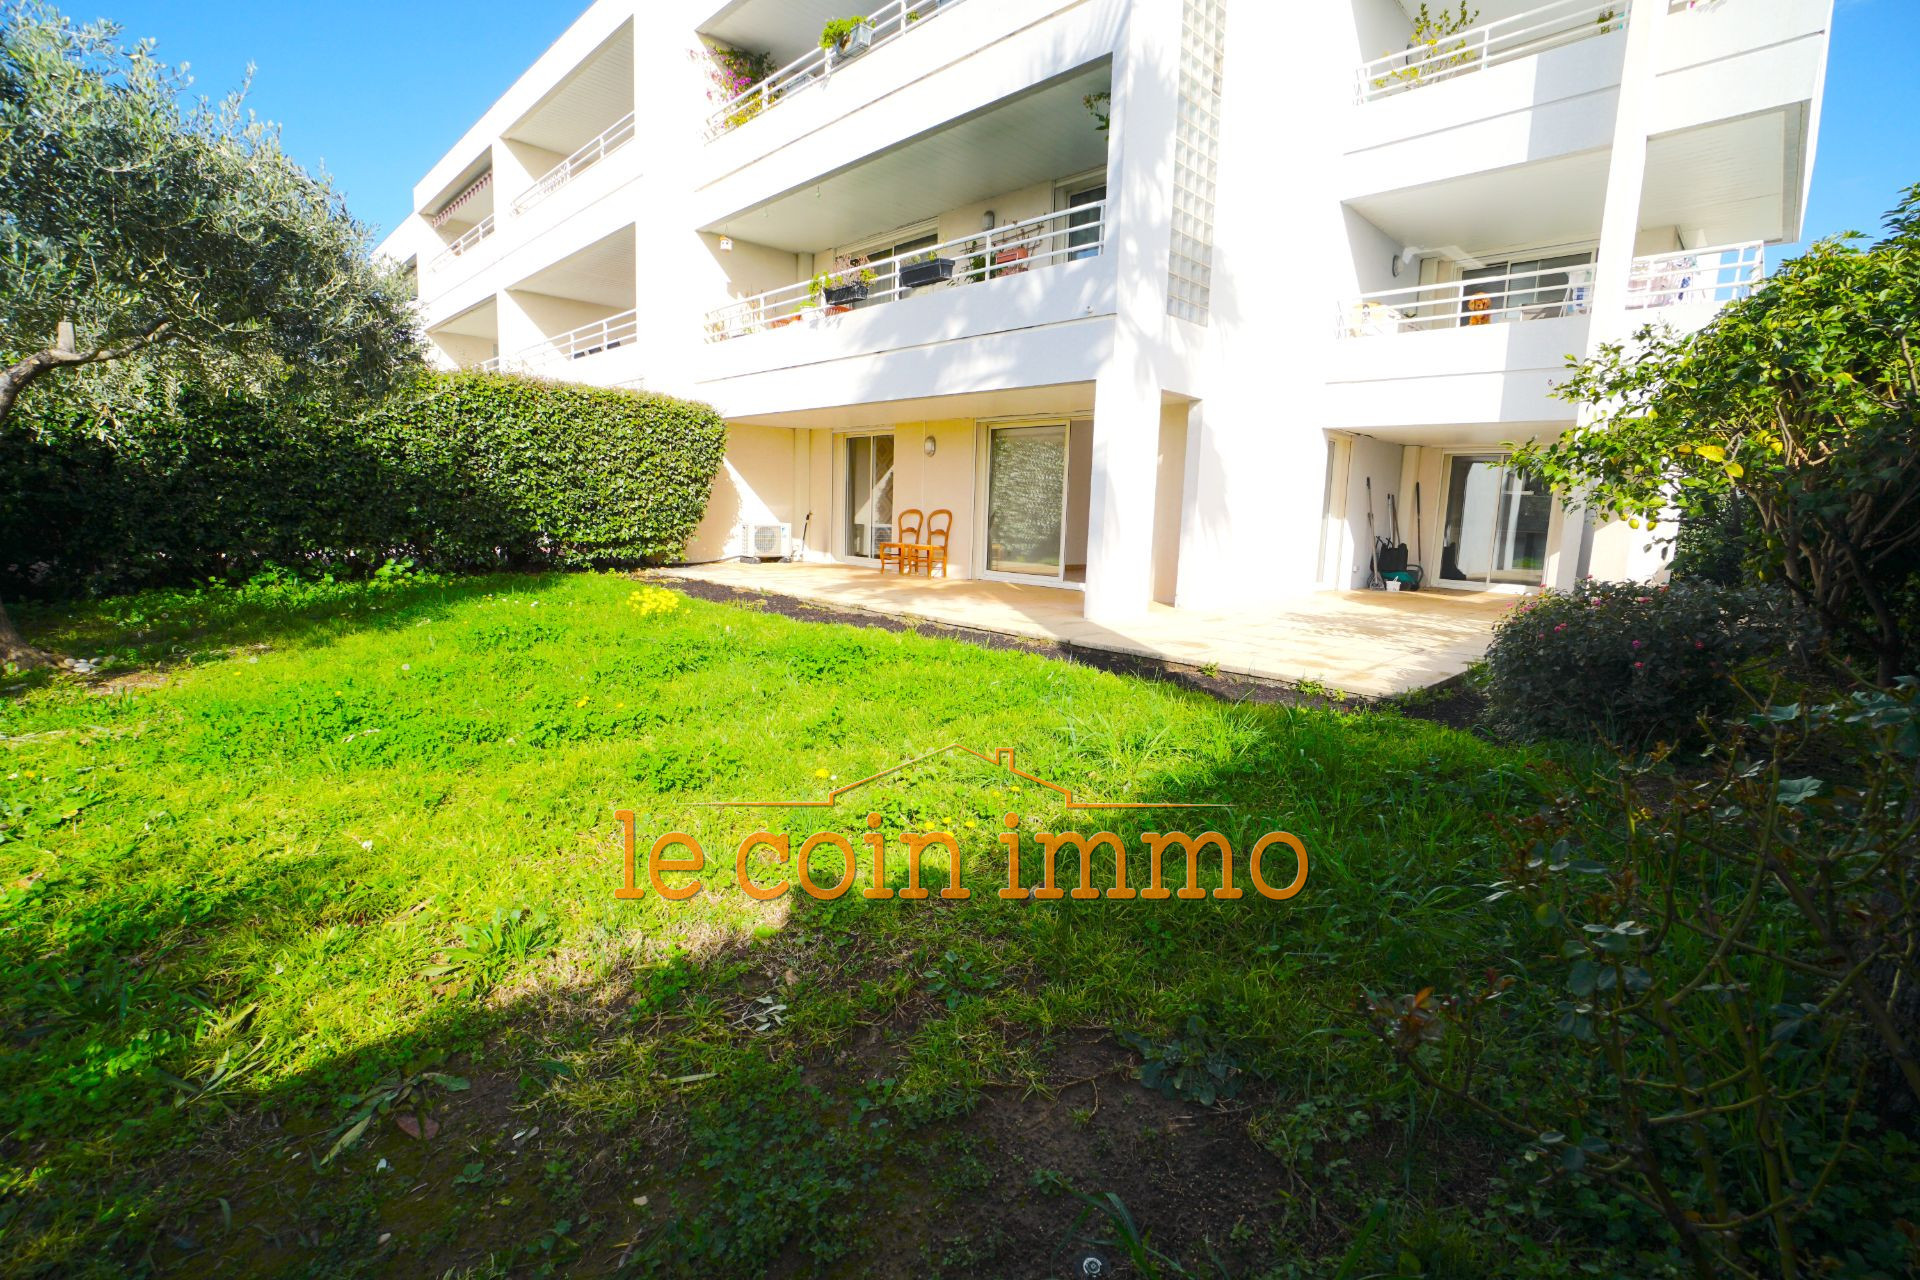 Vente Appartement 65m² à Antibes (06600) - Le Coin Immo